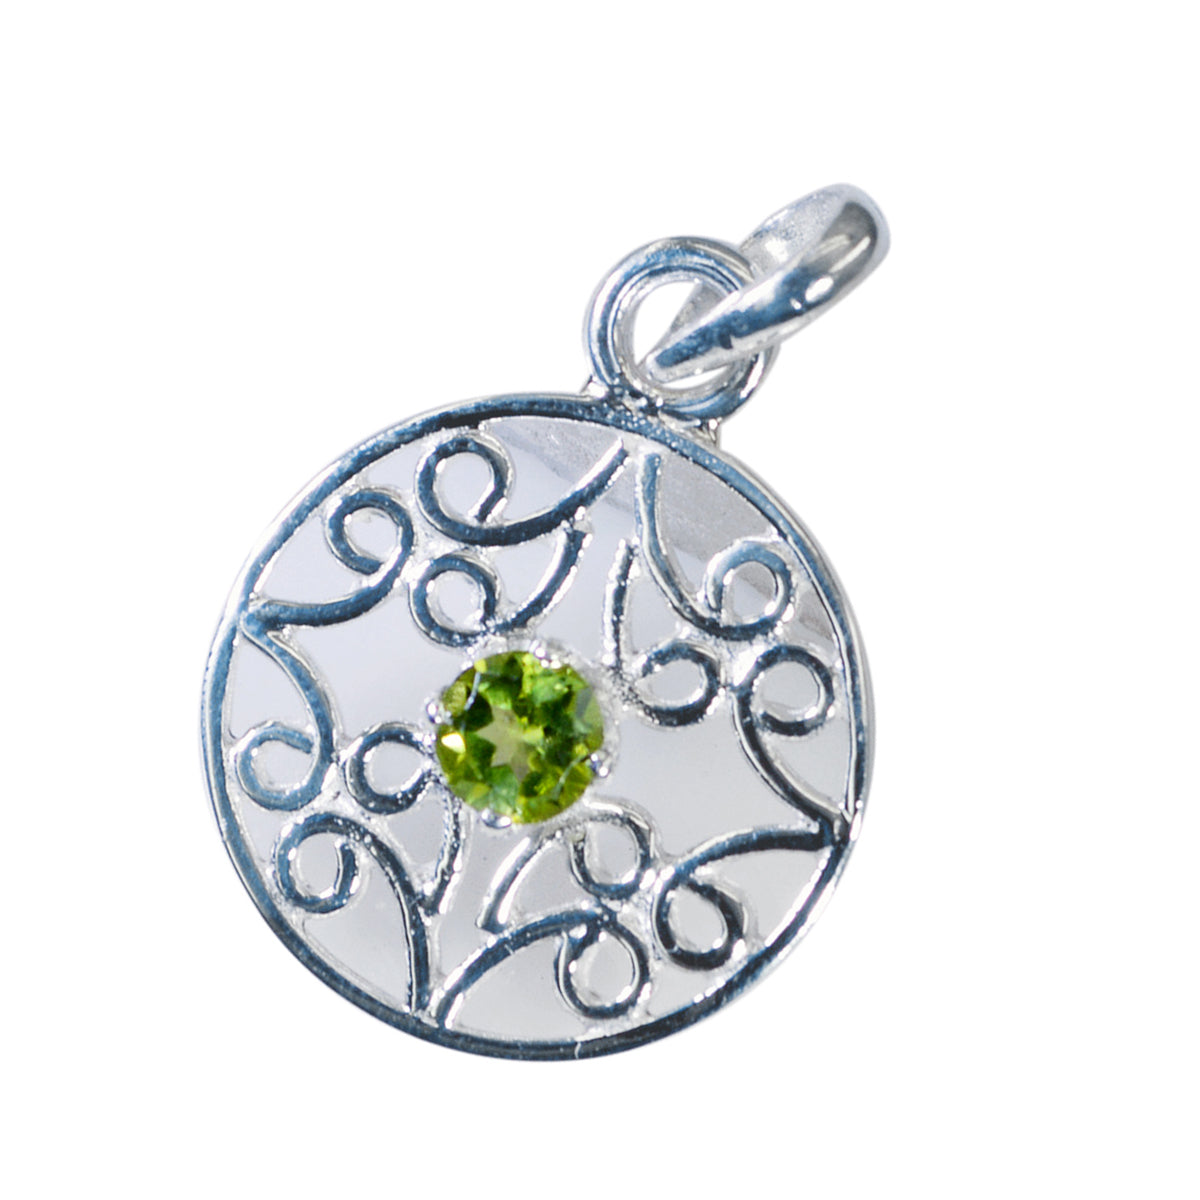 Riyo Spunky Gems Round Faceted Green Peridot Silver Pendant Gift For Wife